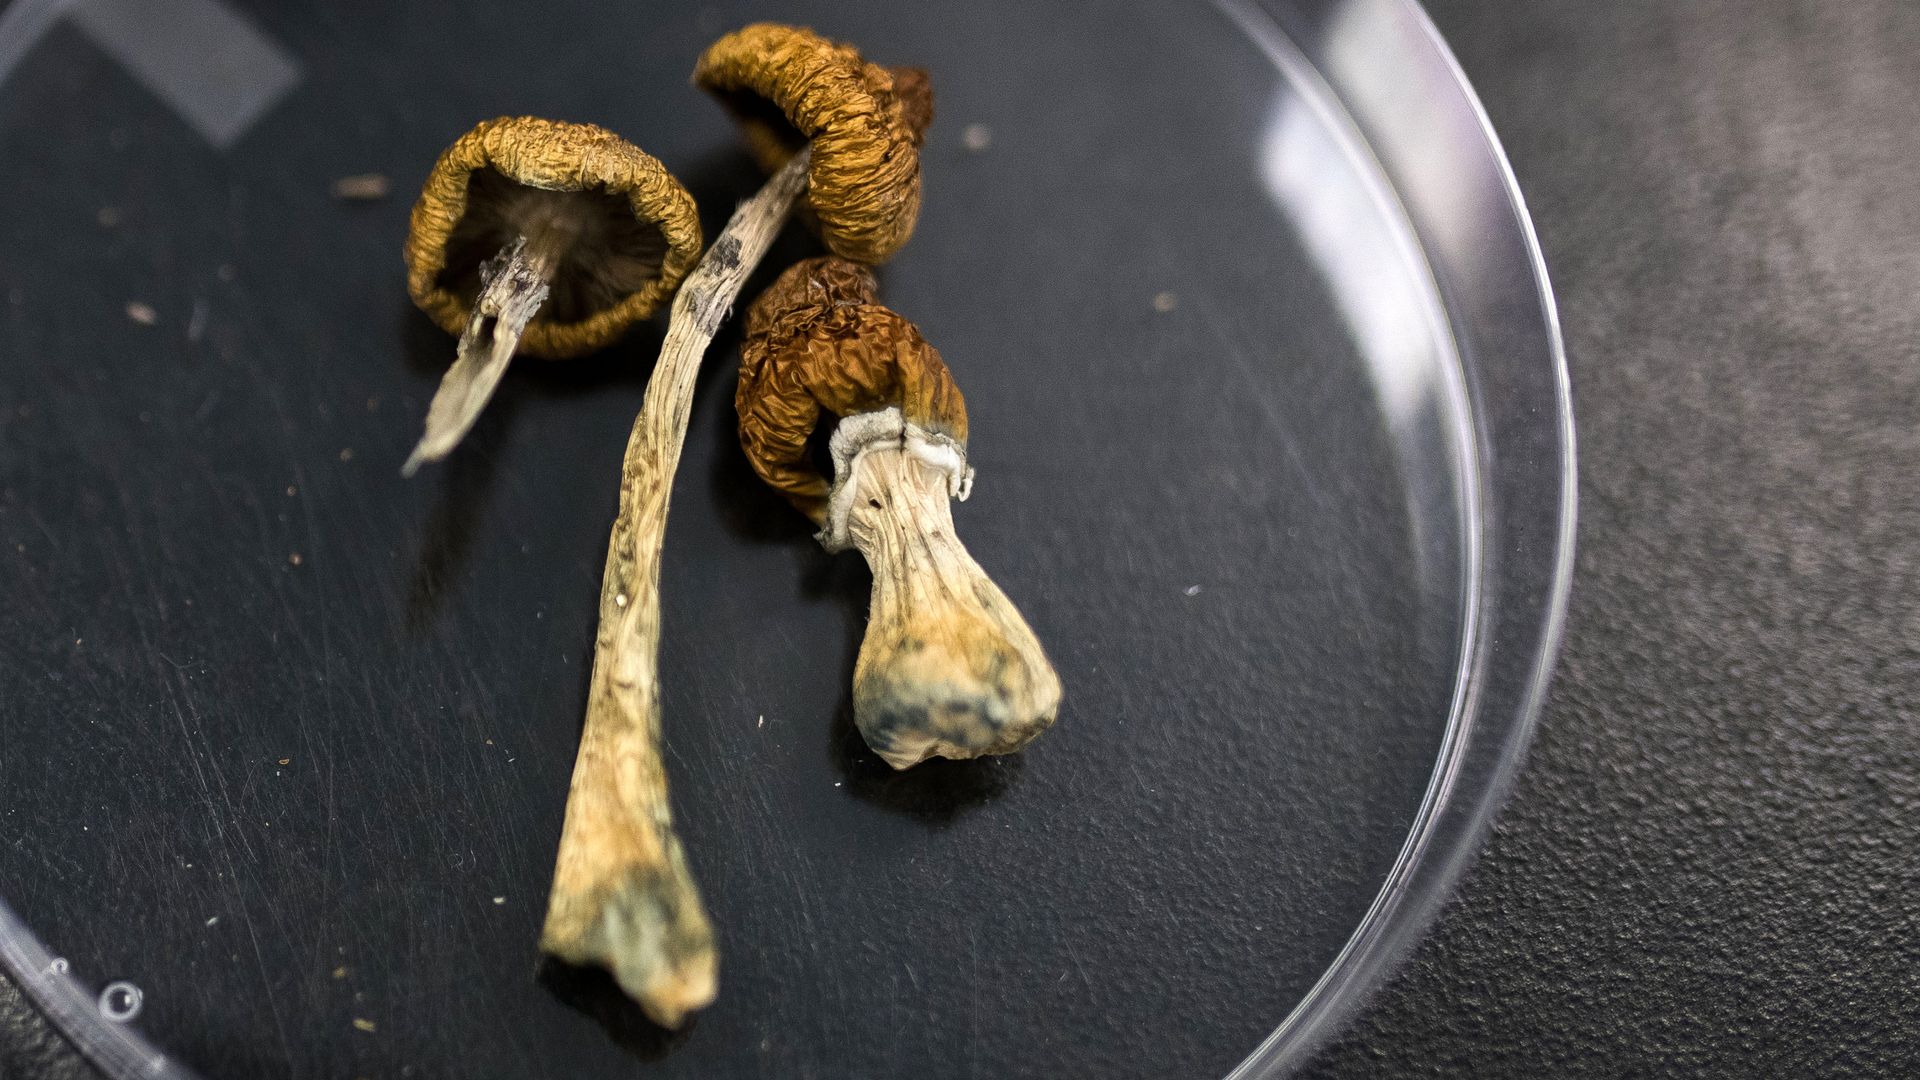 Psilocybe mushrooms at the Numinus Bioscience lab in Nanaimo, British Columbia, Canada, on Wednesday, Sept. 1, 2021